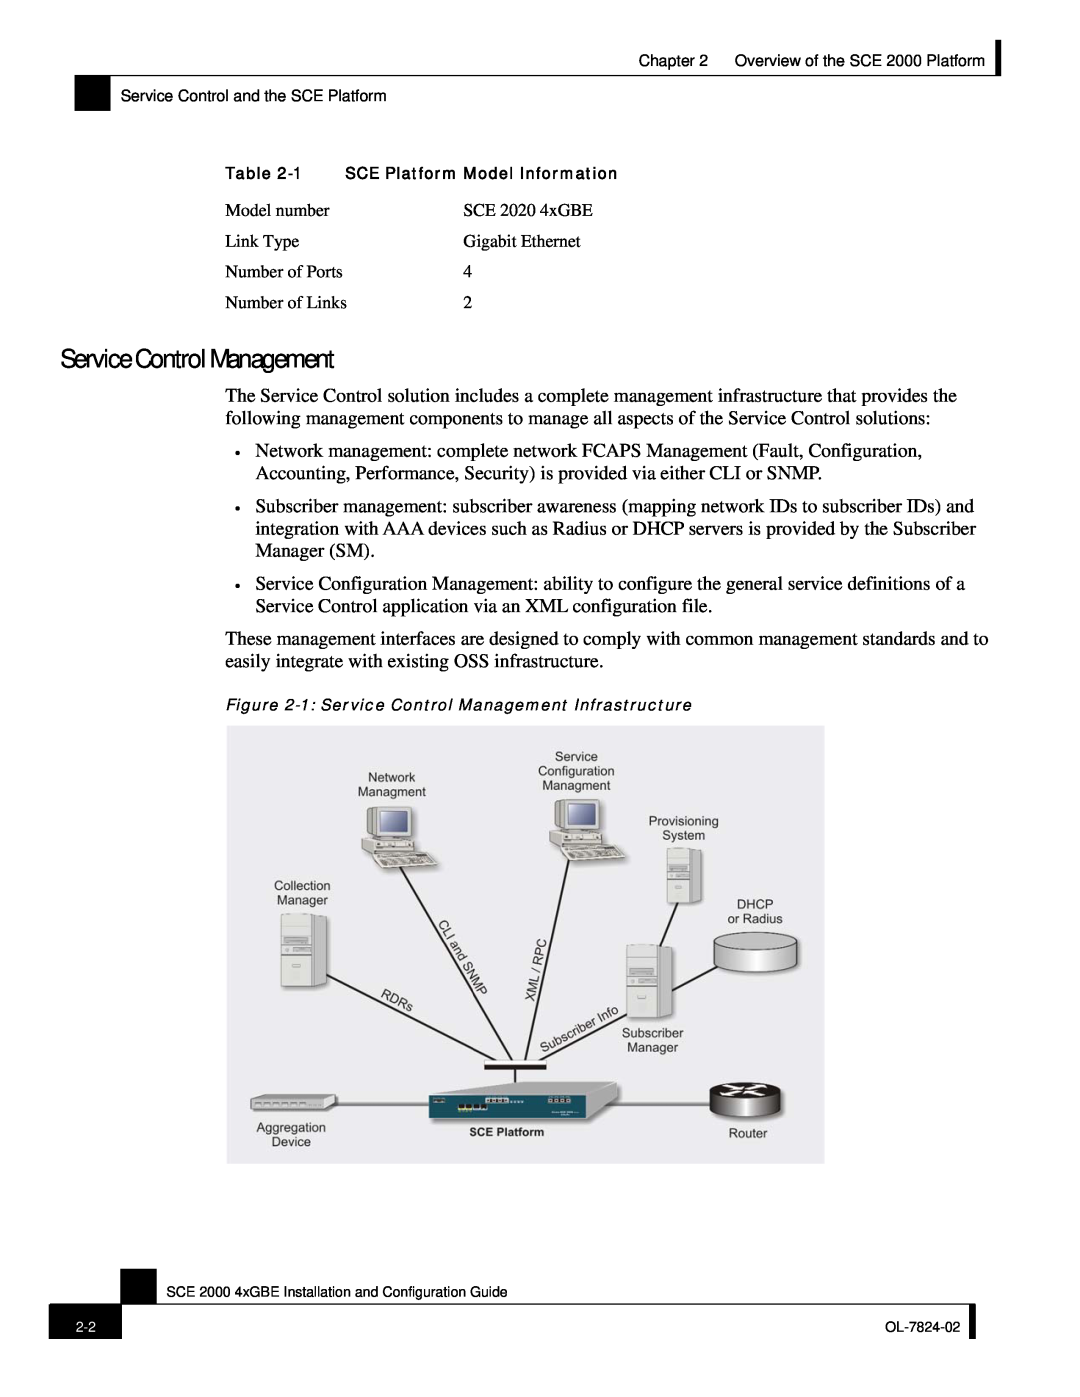 Cisco Systems SCE 2000 4xGBE manual Service Control Management, Model number, SCE 2020 4xGBE, Link Type, Gigabit Ethernet 